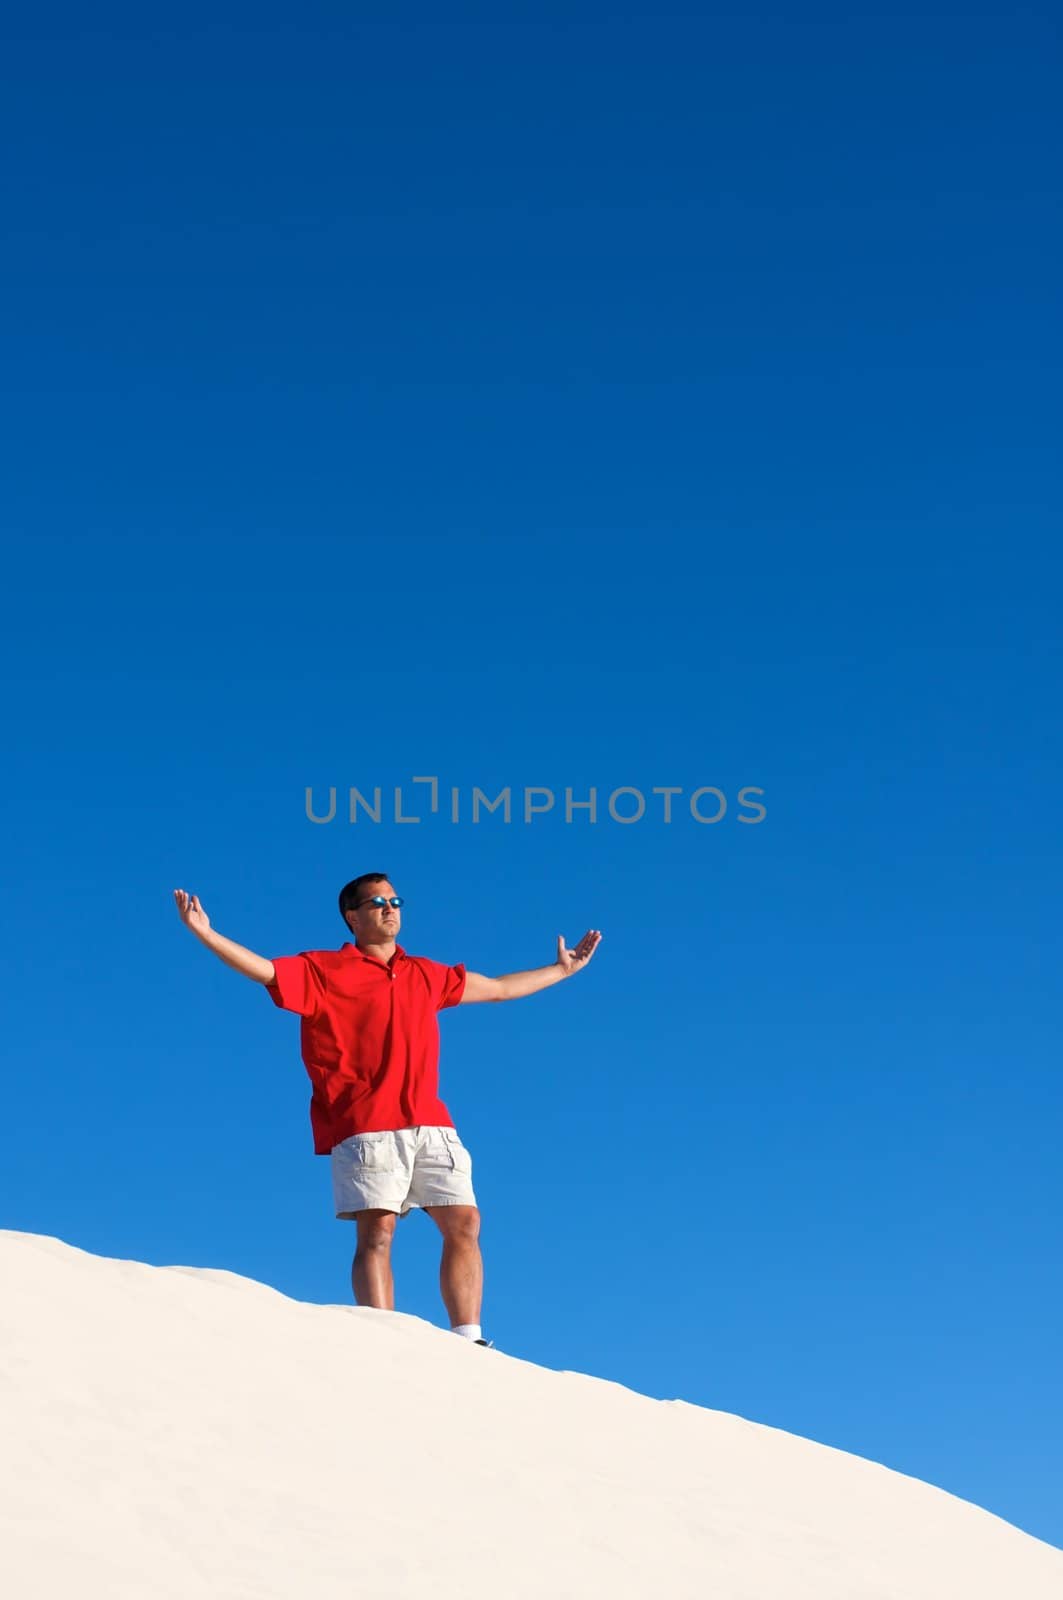 A man standing atop a sand dune by Deimages